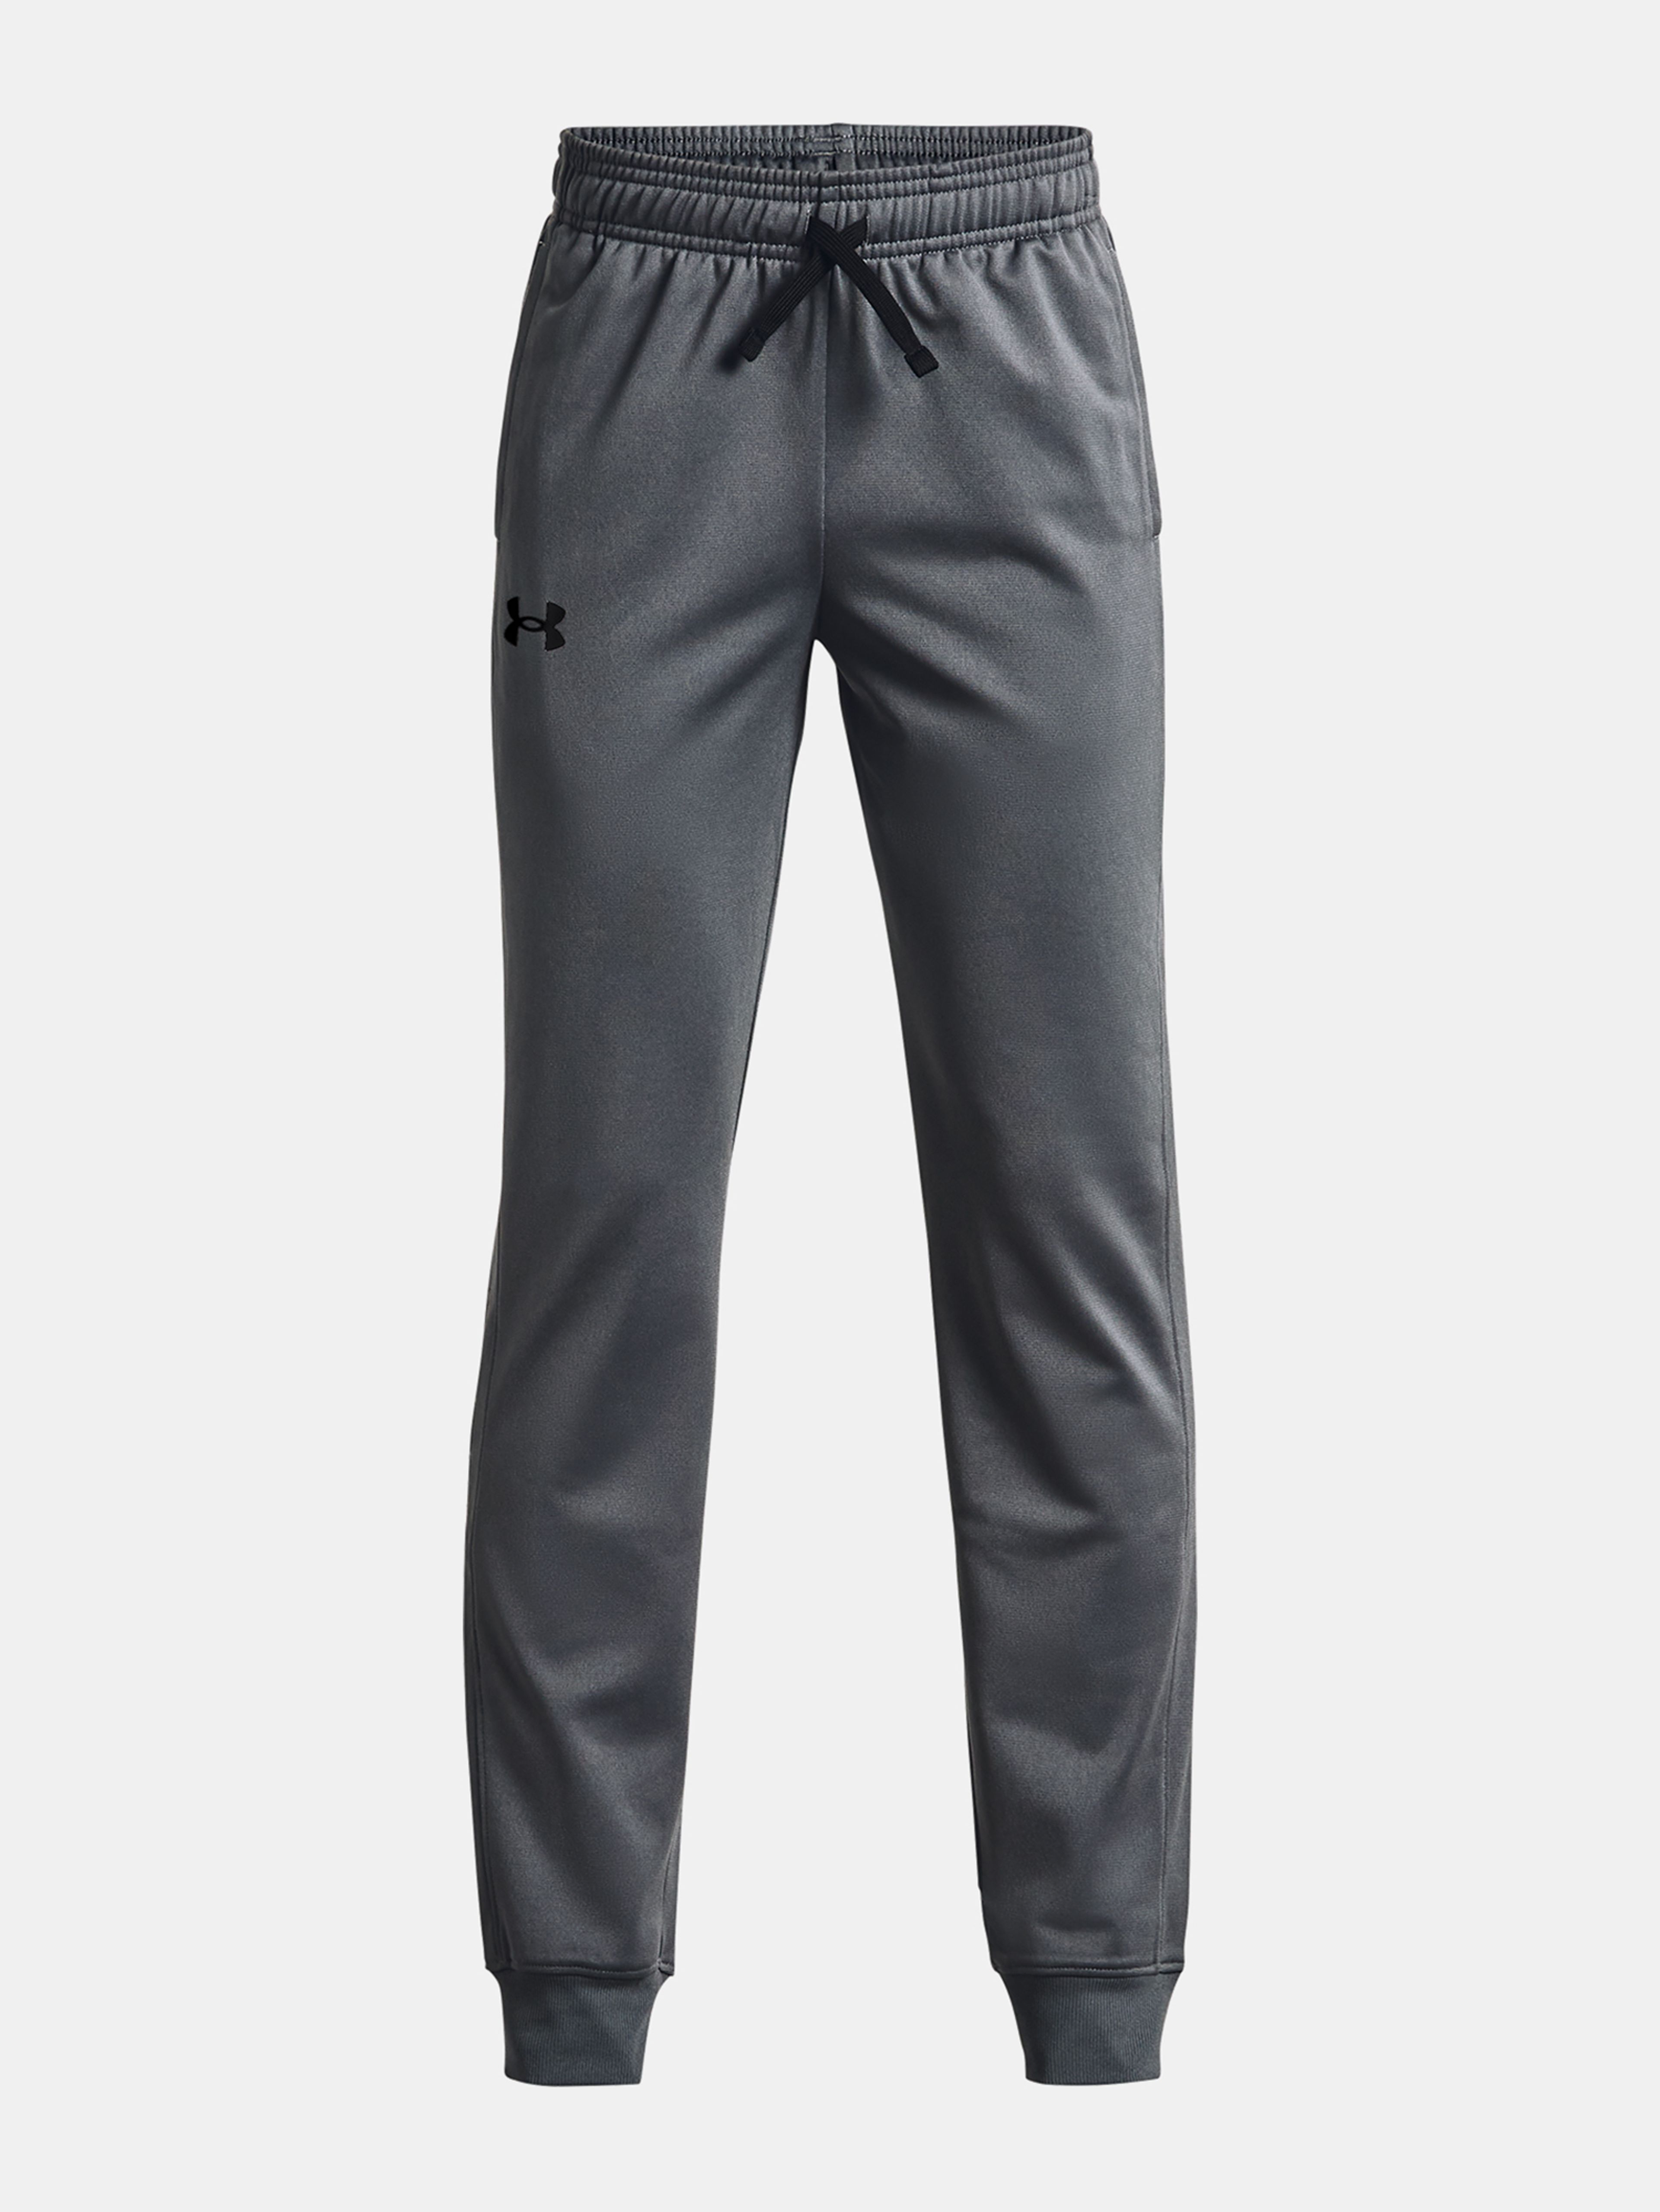 Nohavice Under Armour UA BRAWLER 2.0 TAPERED PANTS-GRY